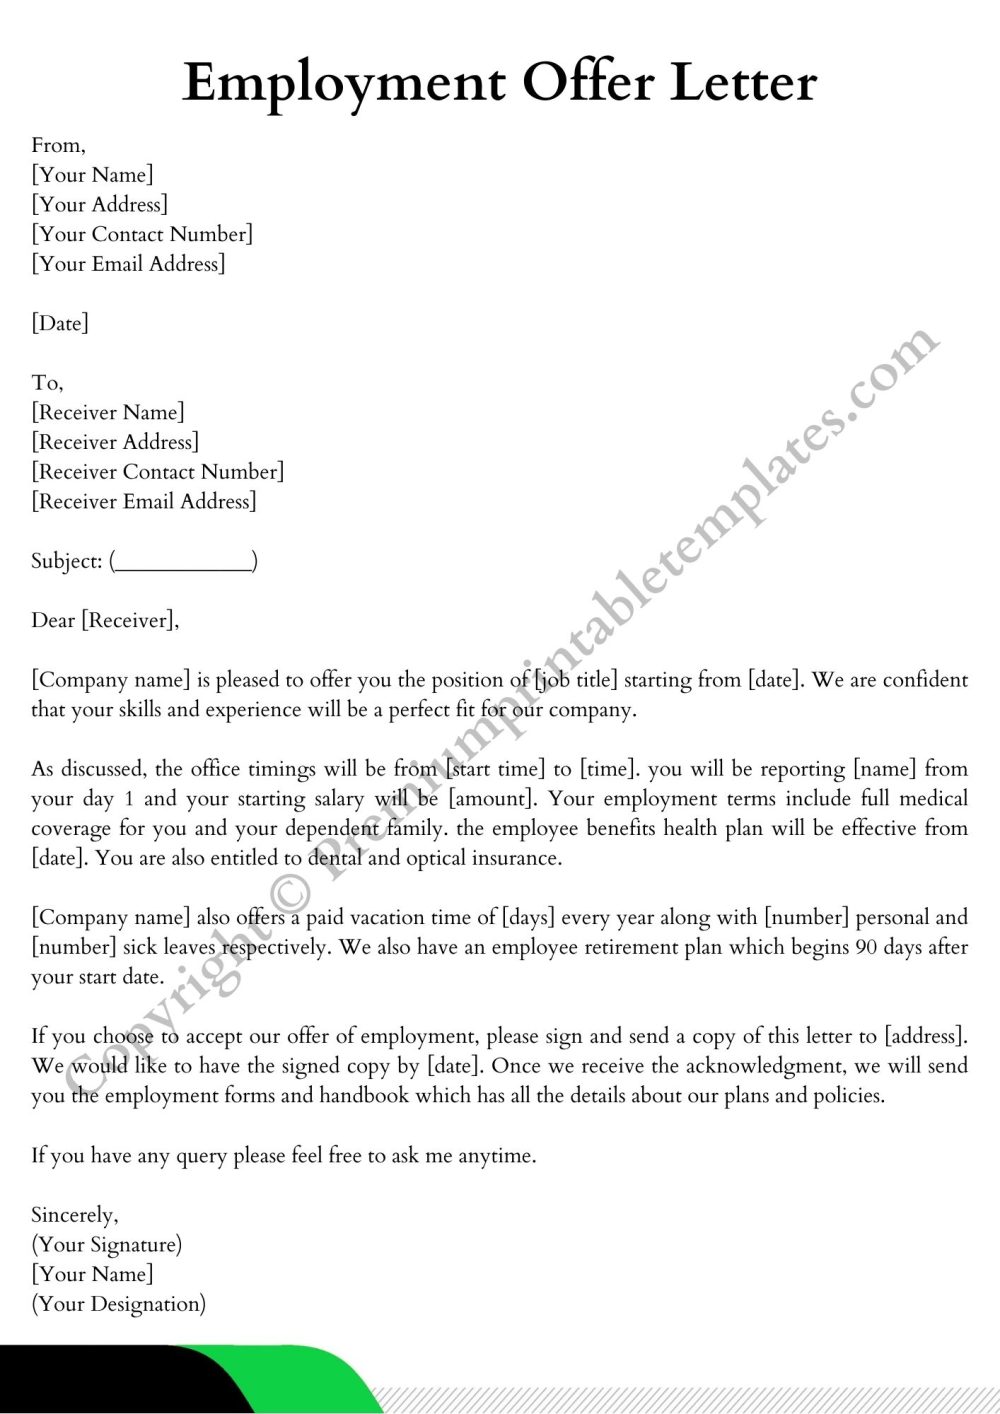 Printable Employment Offer Letter